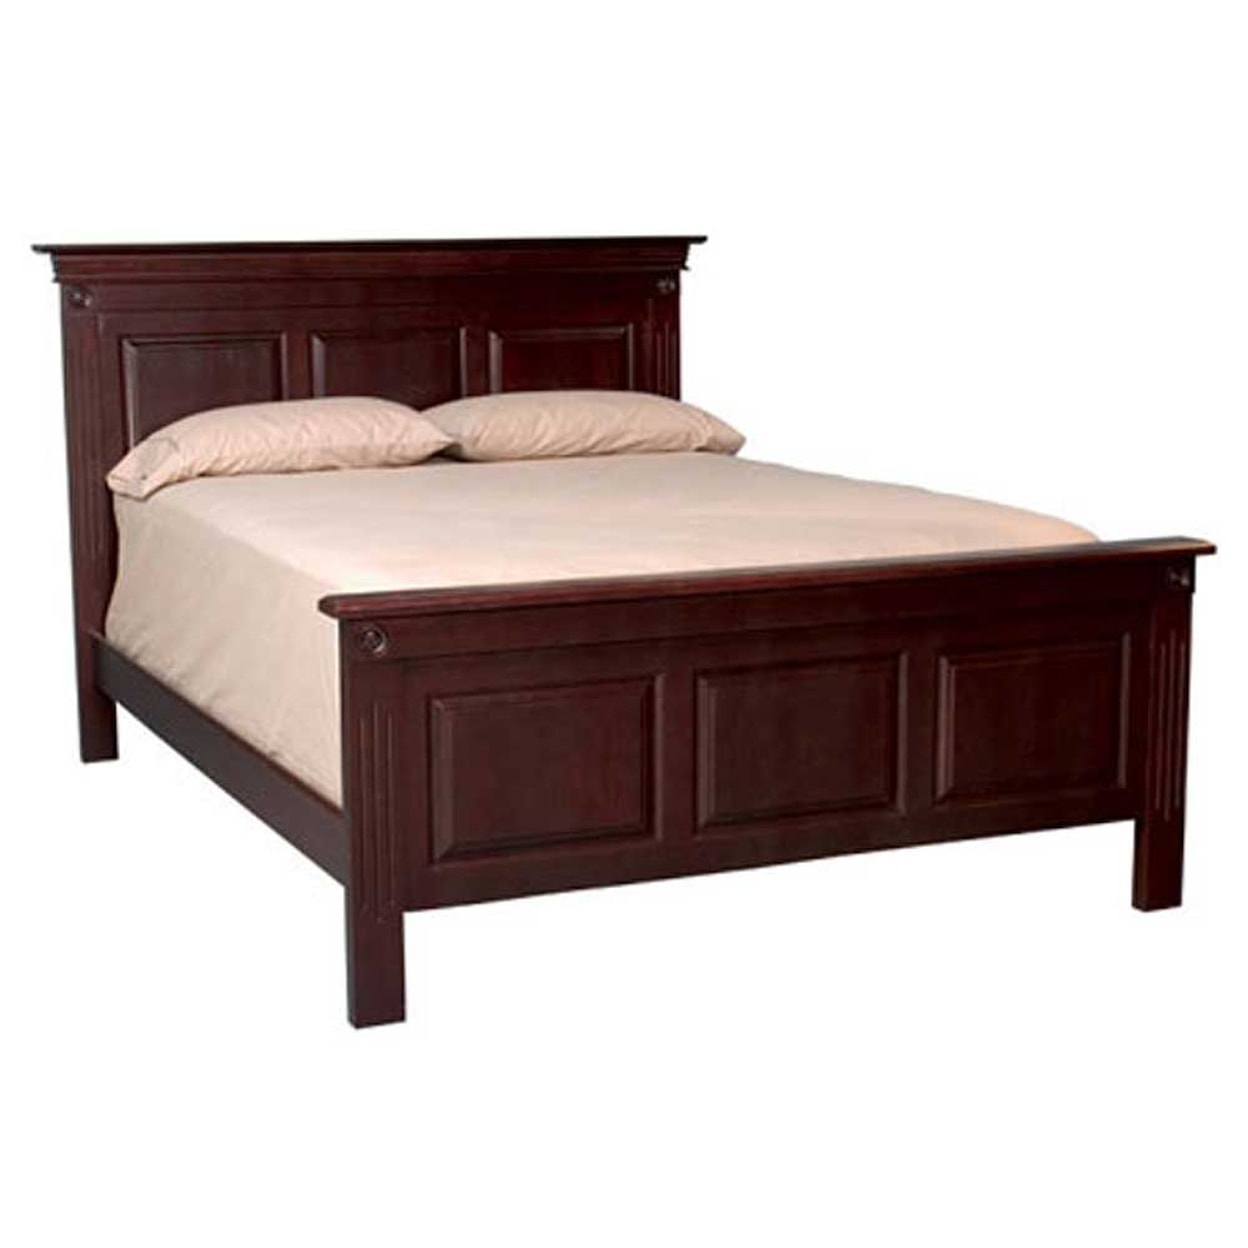 Simply Amish Imperial Amish Queen 3-Panel Bed